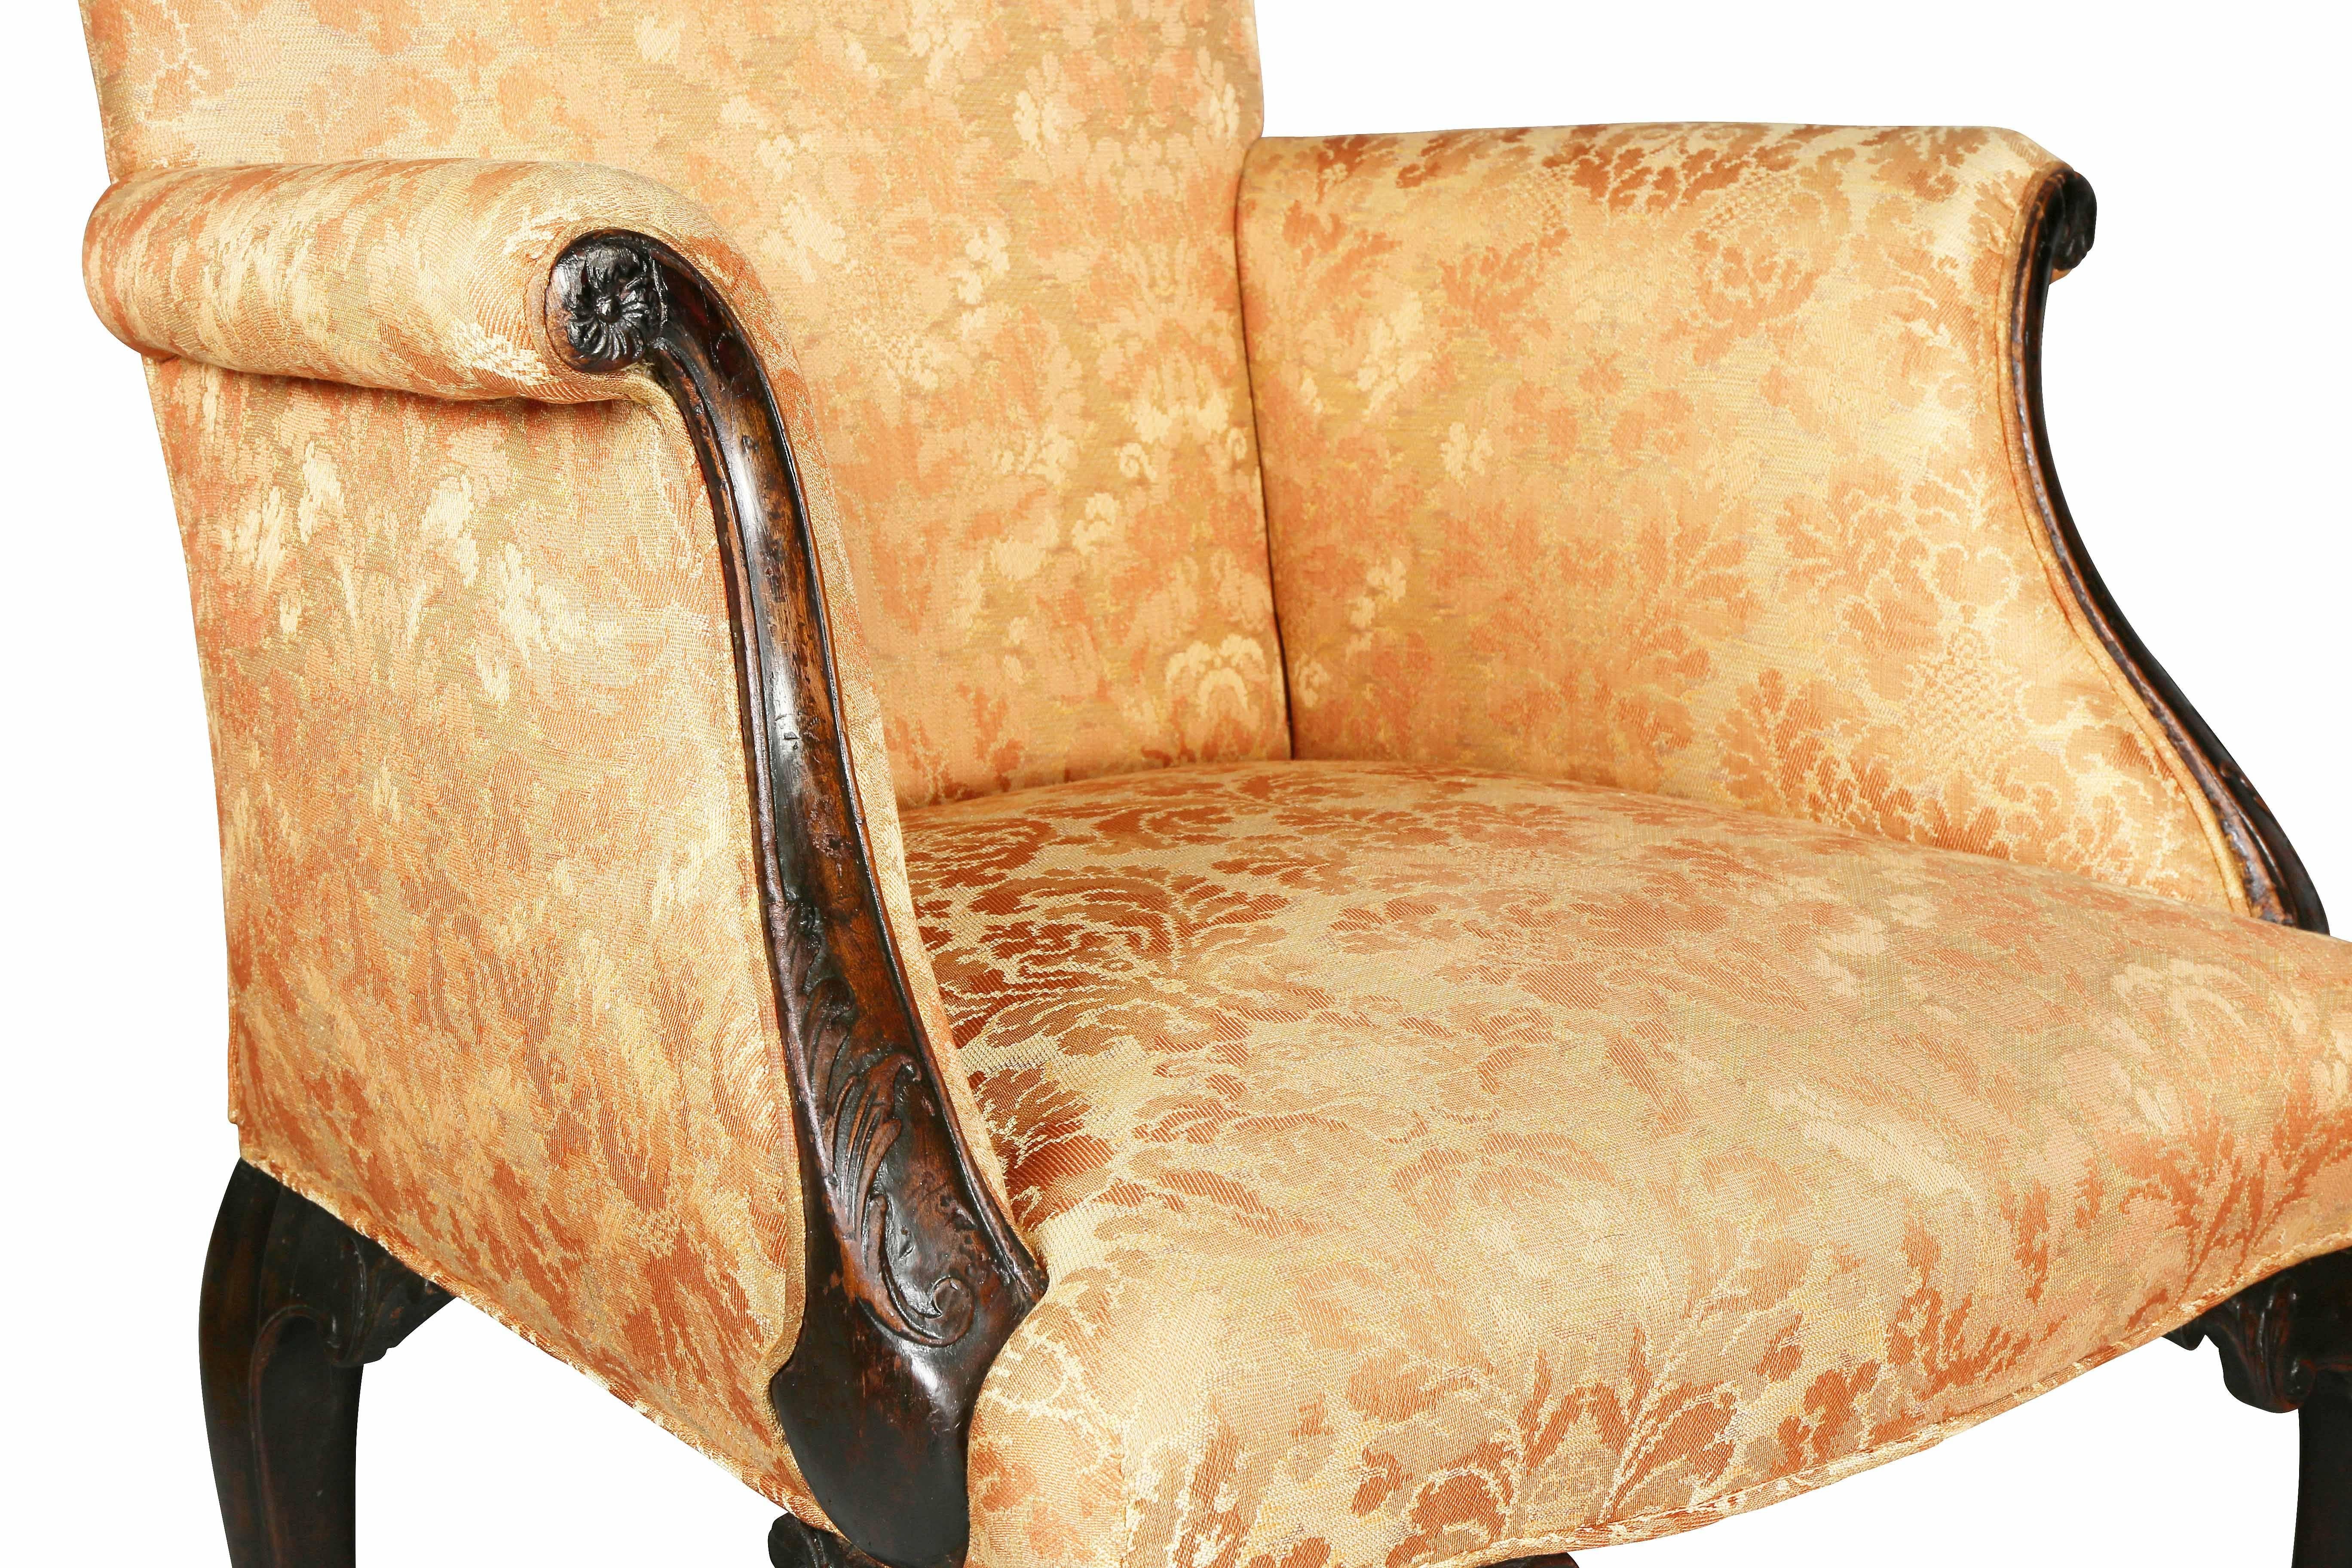 With a serpentine upholstered back and seat raised on cabriole legs with cabouchon and scroll carving ending on scroll feet. Provenance: Arthur Ackerman and Son, NYC. Purchased June 22, 1962.